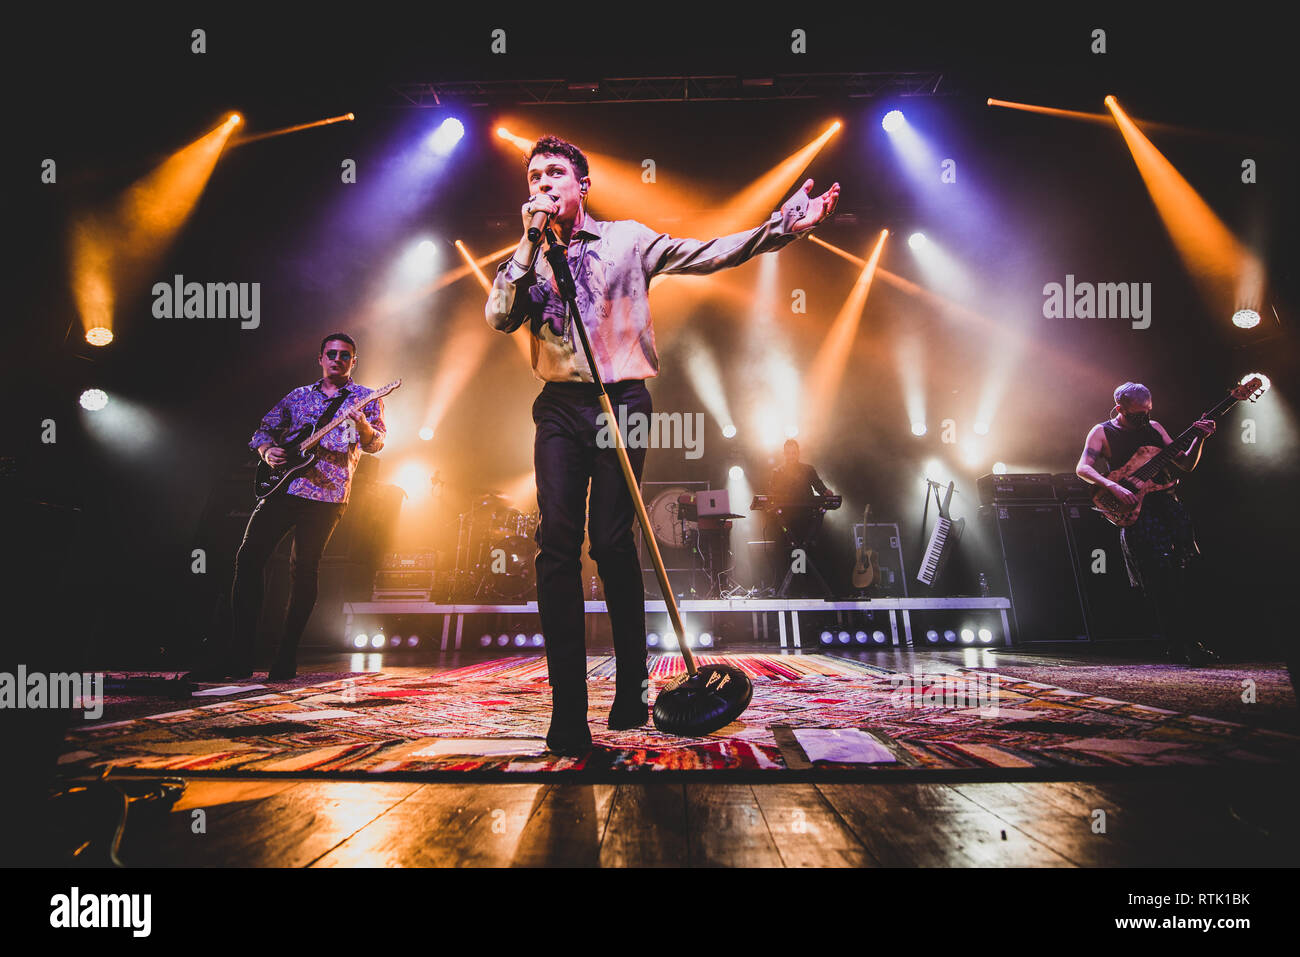 Venaria, Italy. 1st Mar 2019. The Italian singer Irama, stage name of Filippo Maria Fanti, performing live on stage for his first 'Giovani per Sempre' (Forever Young) tour concert in Venaria, at the Teatro della Concordia, in front a sold out venue. Credit: Alessandro Bosio/Alamy Live News Stock Photo